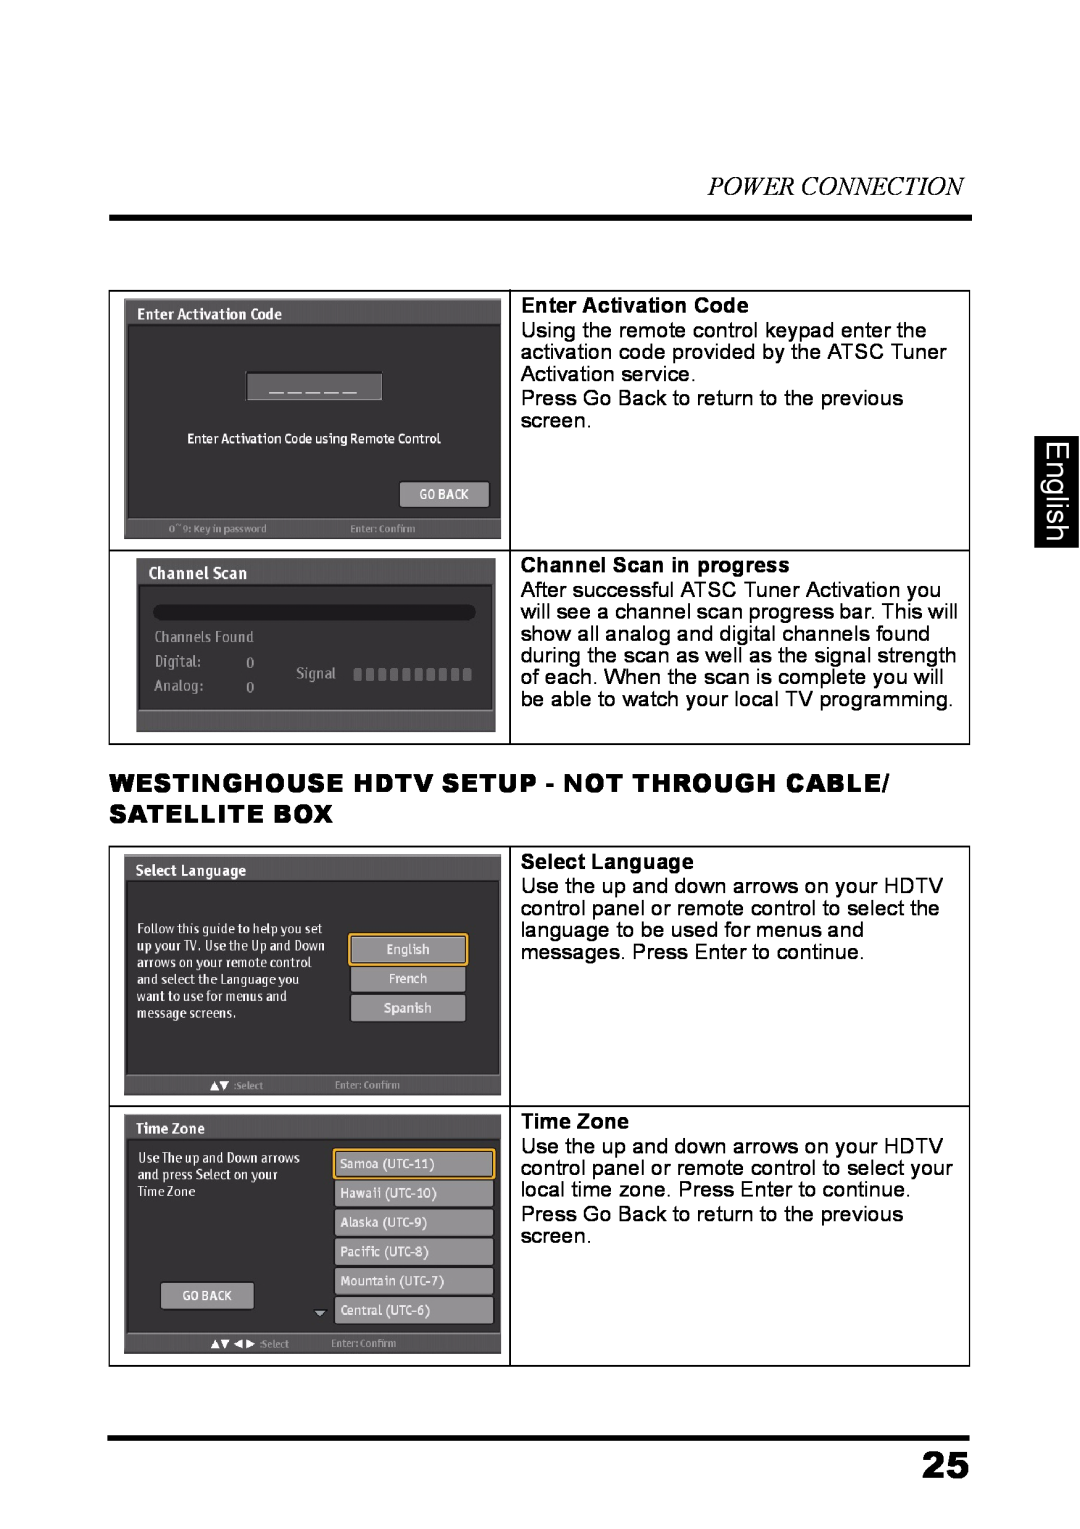 Westinghouse LD-3237 user manual English, Power Connection, Westinghouse Hdtv Setup - Not Through Cable/ Satellite Box 